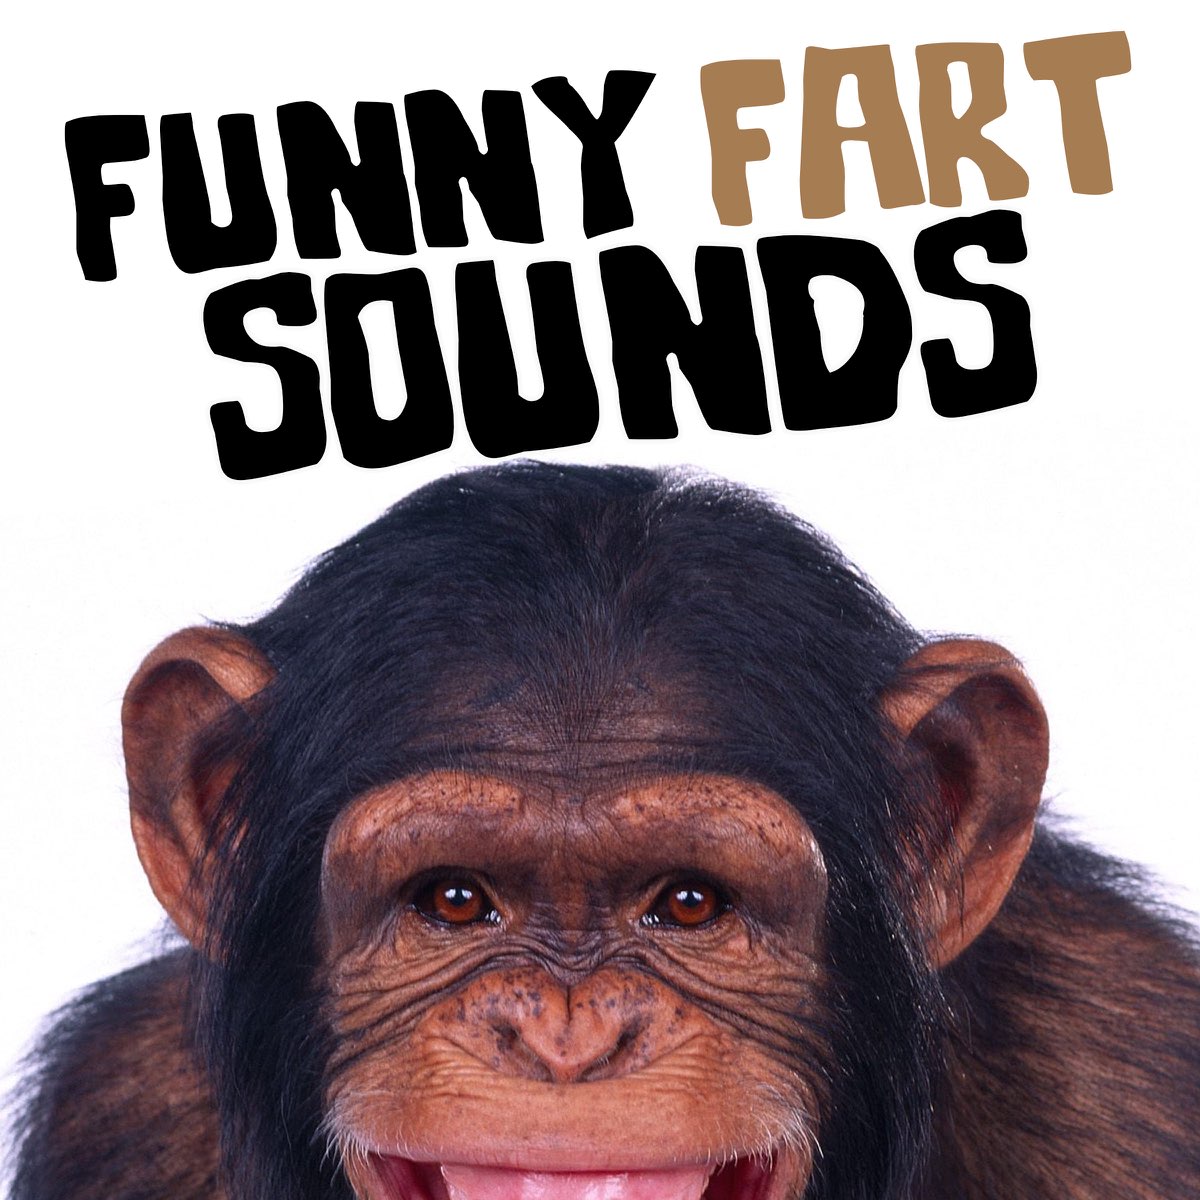 Funny Fart Sounds by Fart Sound Effects on Apple Music